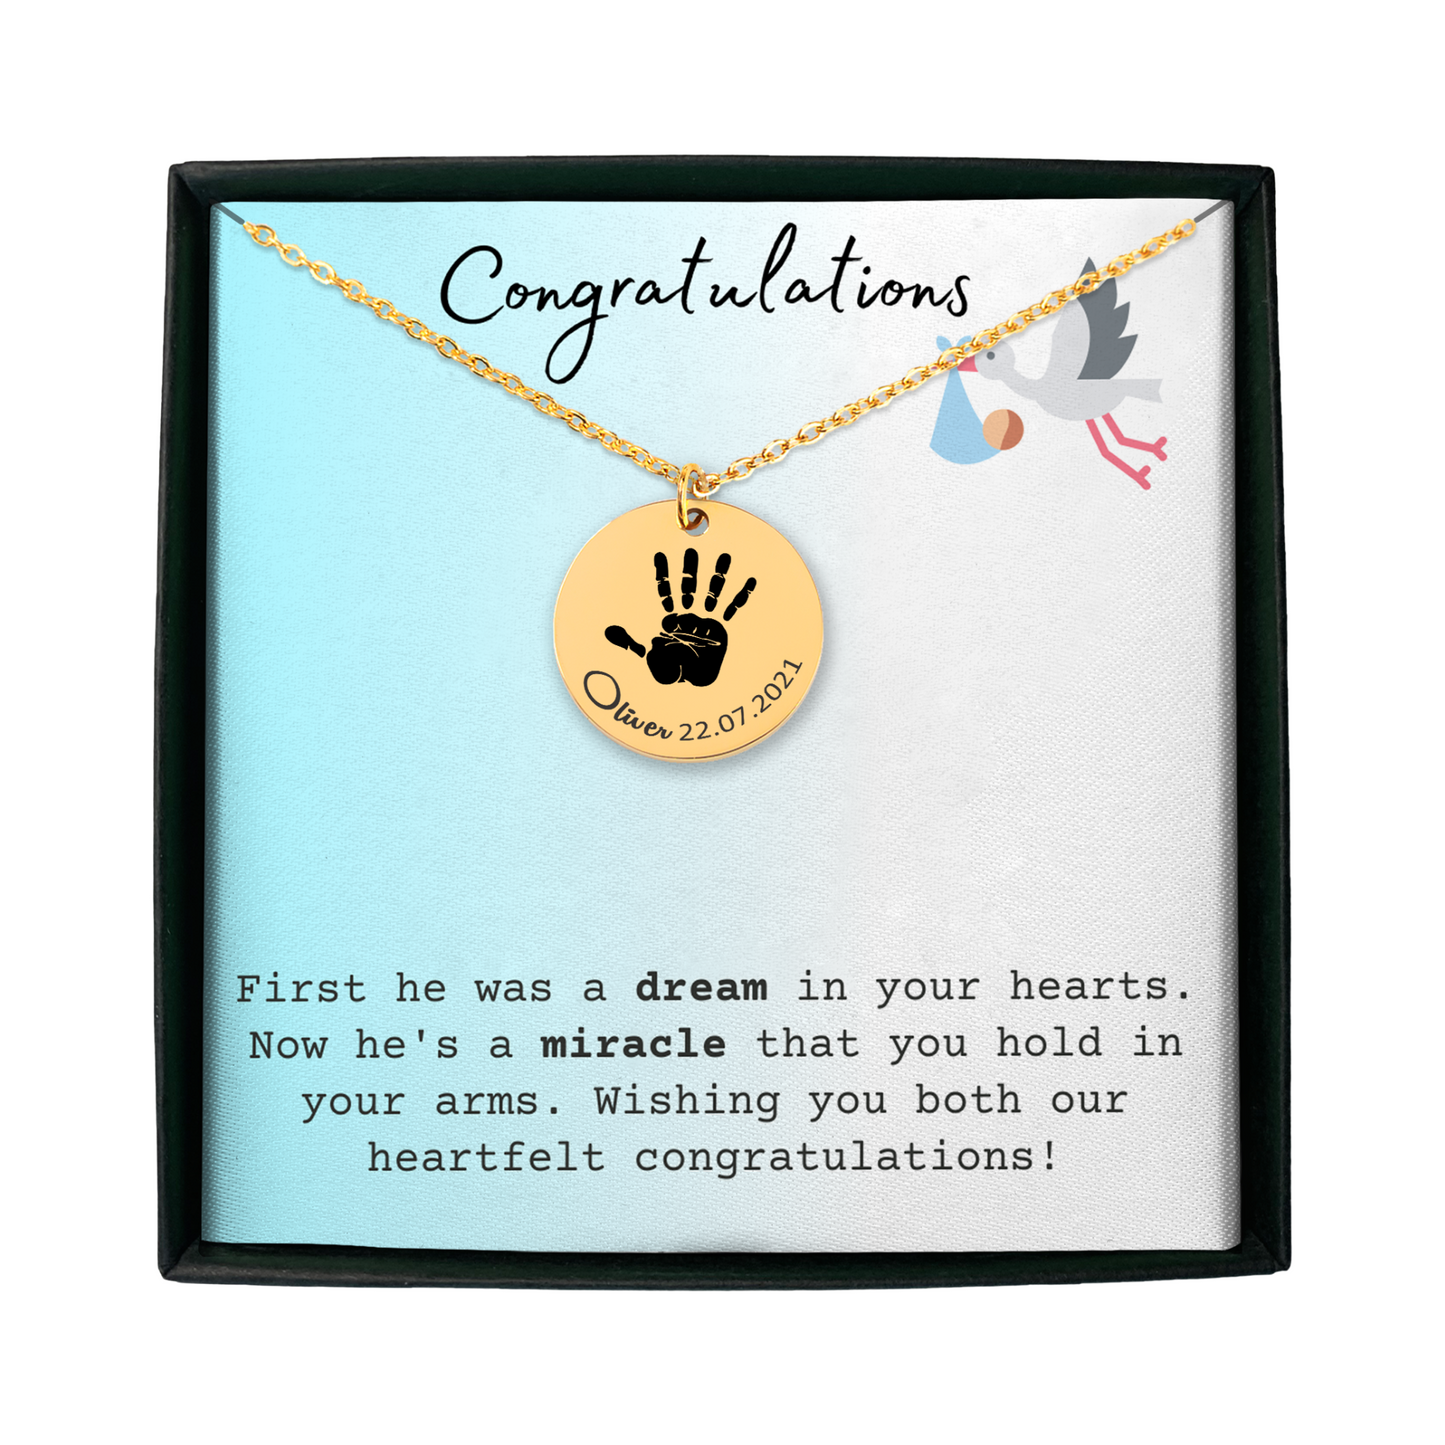 Personalized Necklace, Gifts for Mom, Gifts for Dad, Baby Shower, Anniversary, Mother, Father, Sibling, Actual Hand Print Necklace